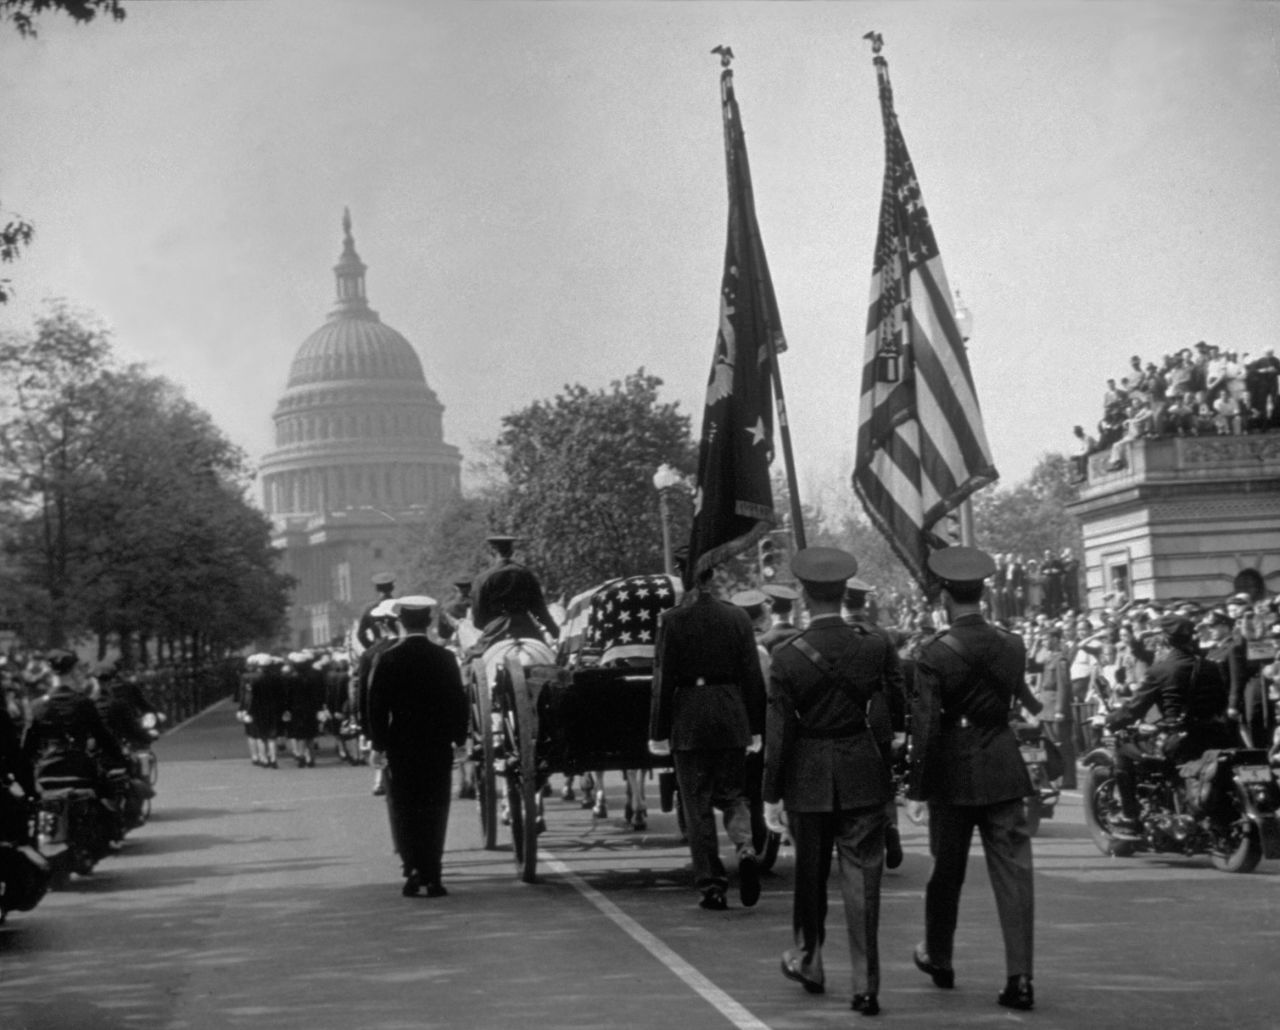 President Franklin D. Roosevelt's funeral procession goes down Connecticut Avenue on its way to the White House. Roosevelt died on April 12, 1945, in Warm Springs, Georgia, just weeks before Germany's surrender.